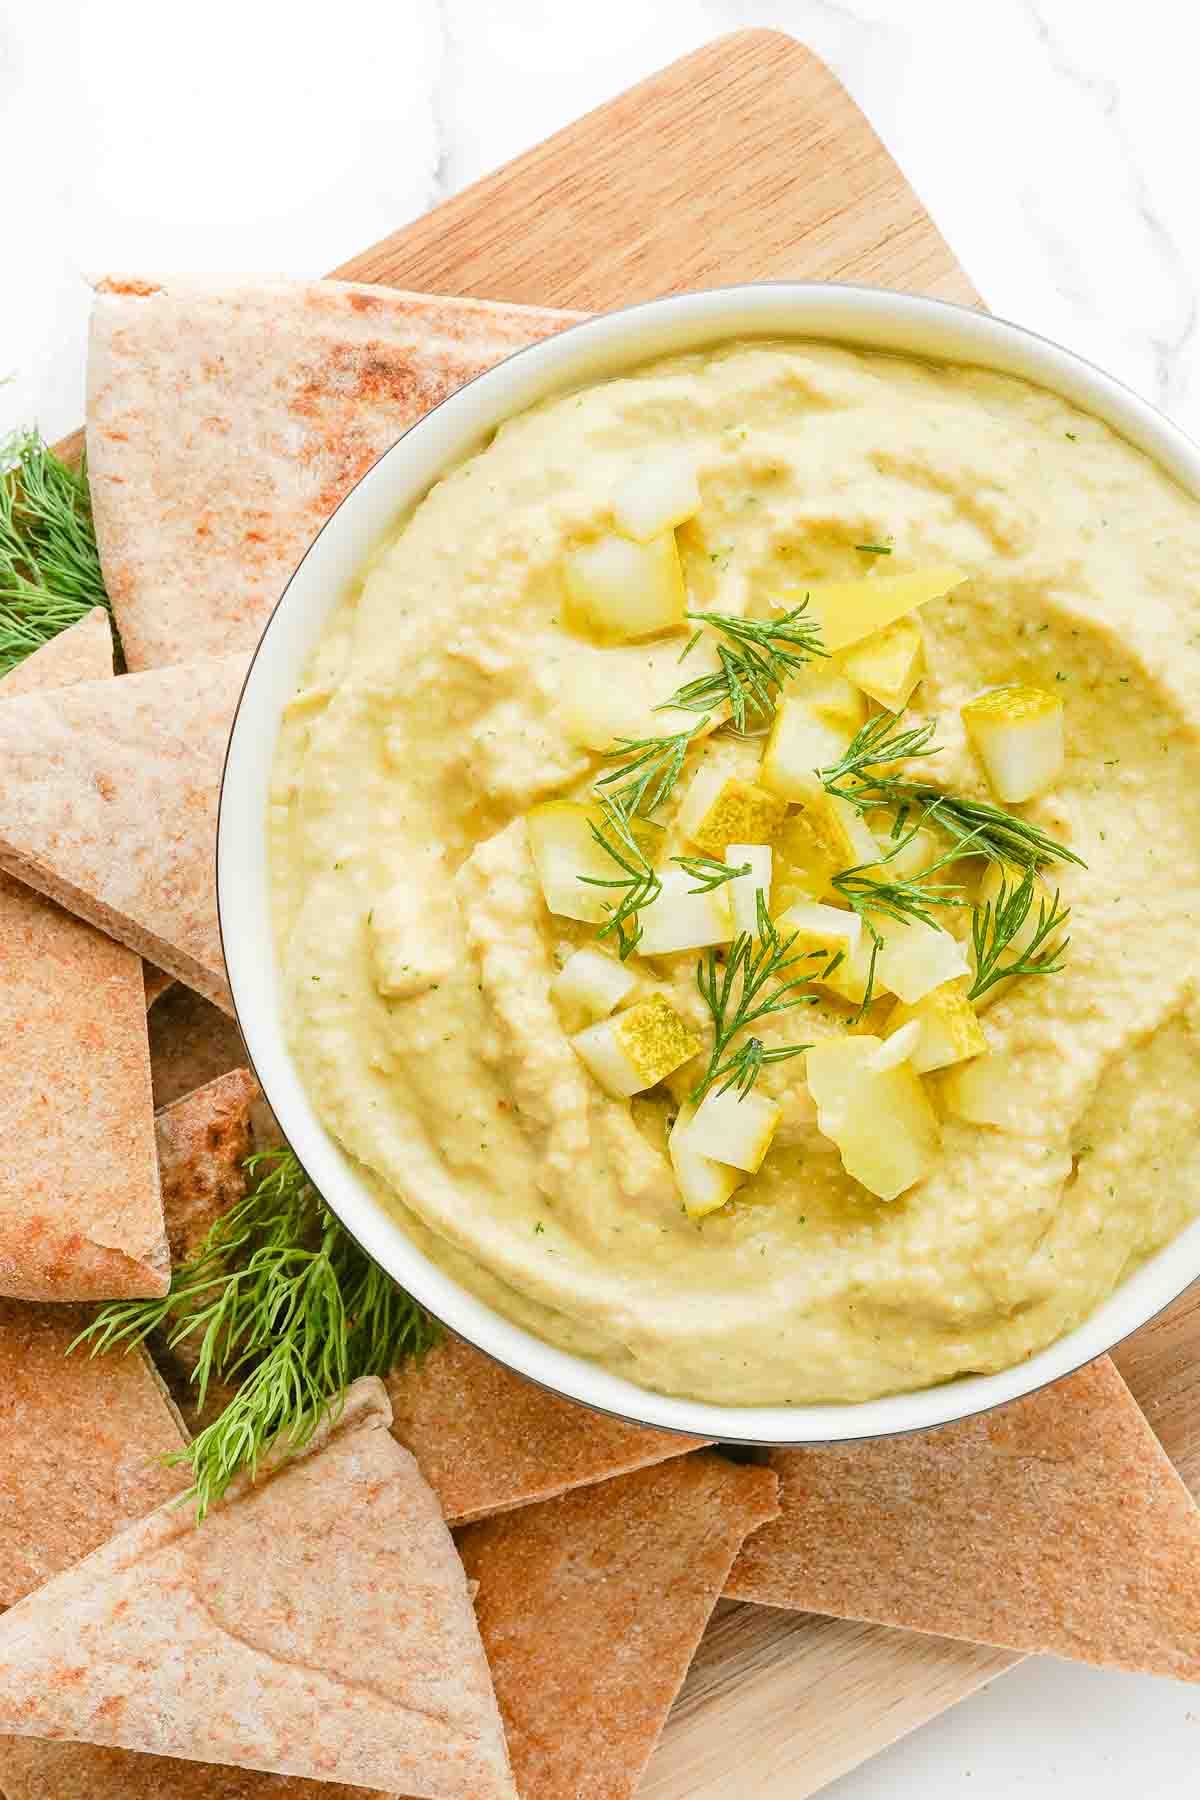 bowl of hummus garnished with pickles and dill with pita on the side.